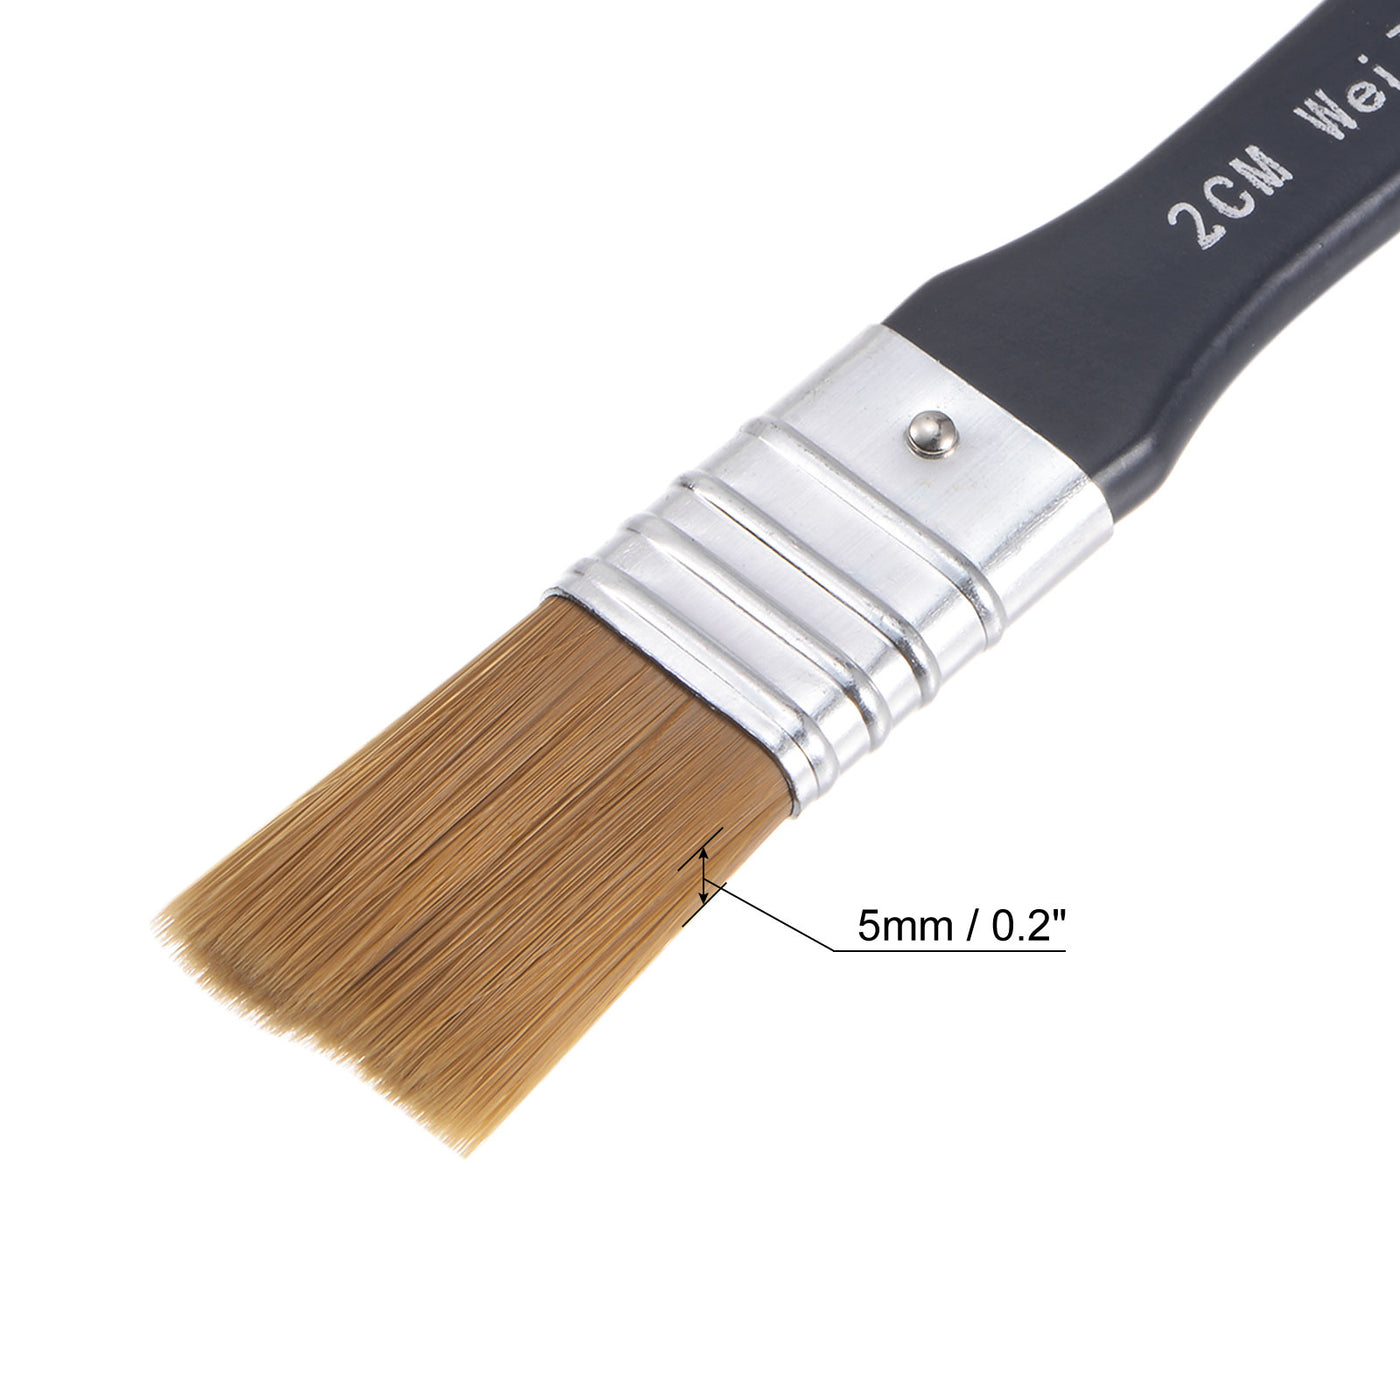 Uxcell Uxcell 1.6" Width Small Paint Brush Nylon Bristle with Wood Handle Tool 2Pcs